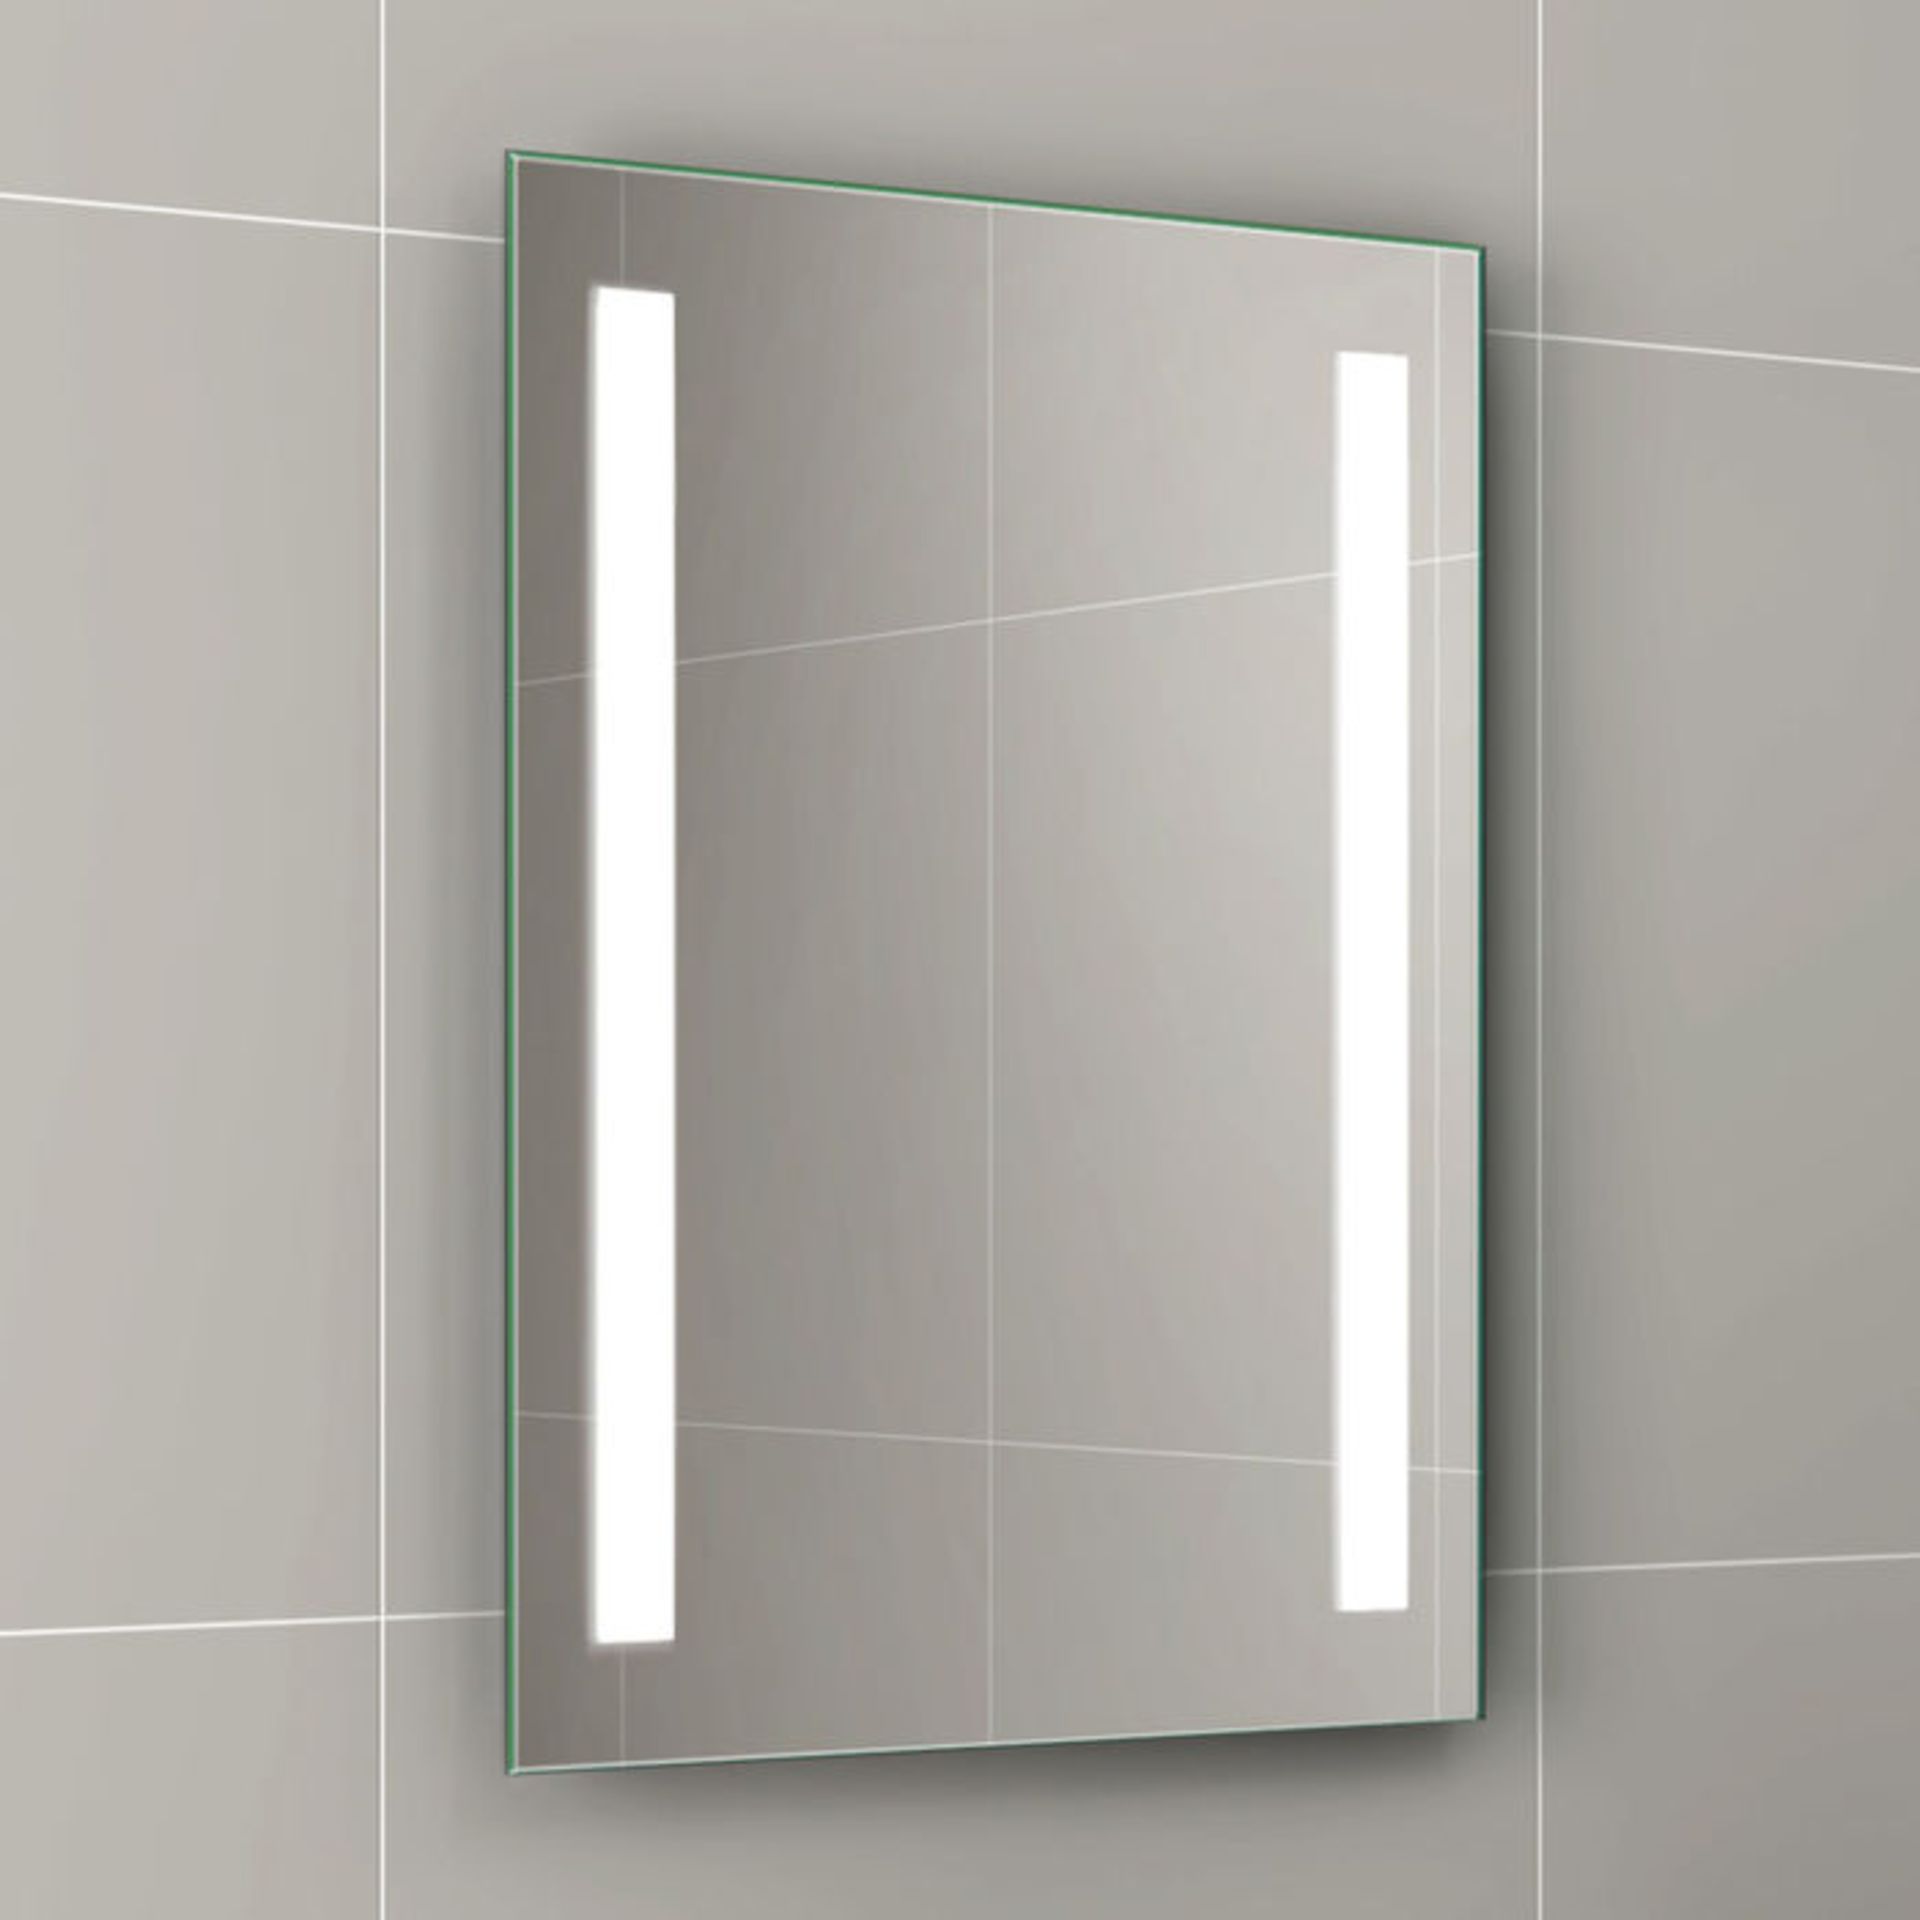 (TY264) 500x700mm Omega Illuminated LED Mirror - Battery Operated. Energy saving controlled On / Off - Image 2 of 4